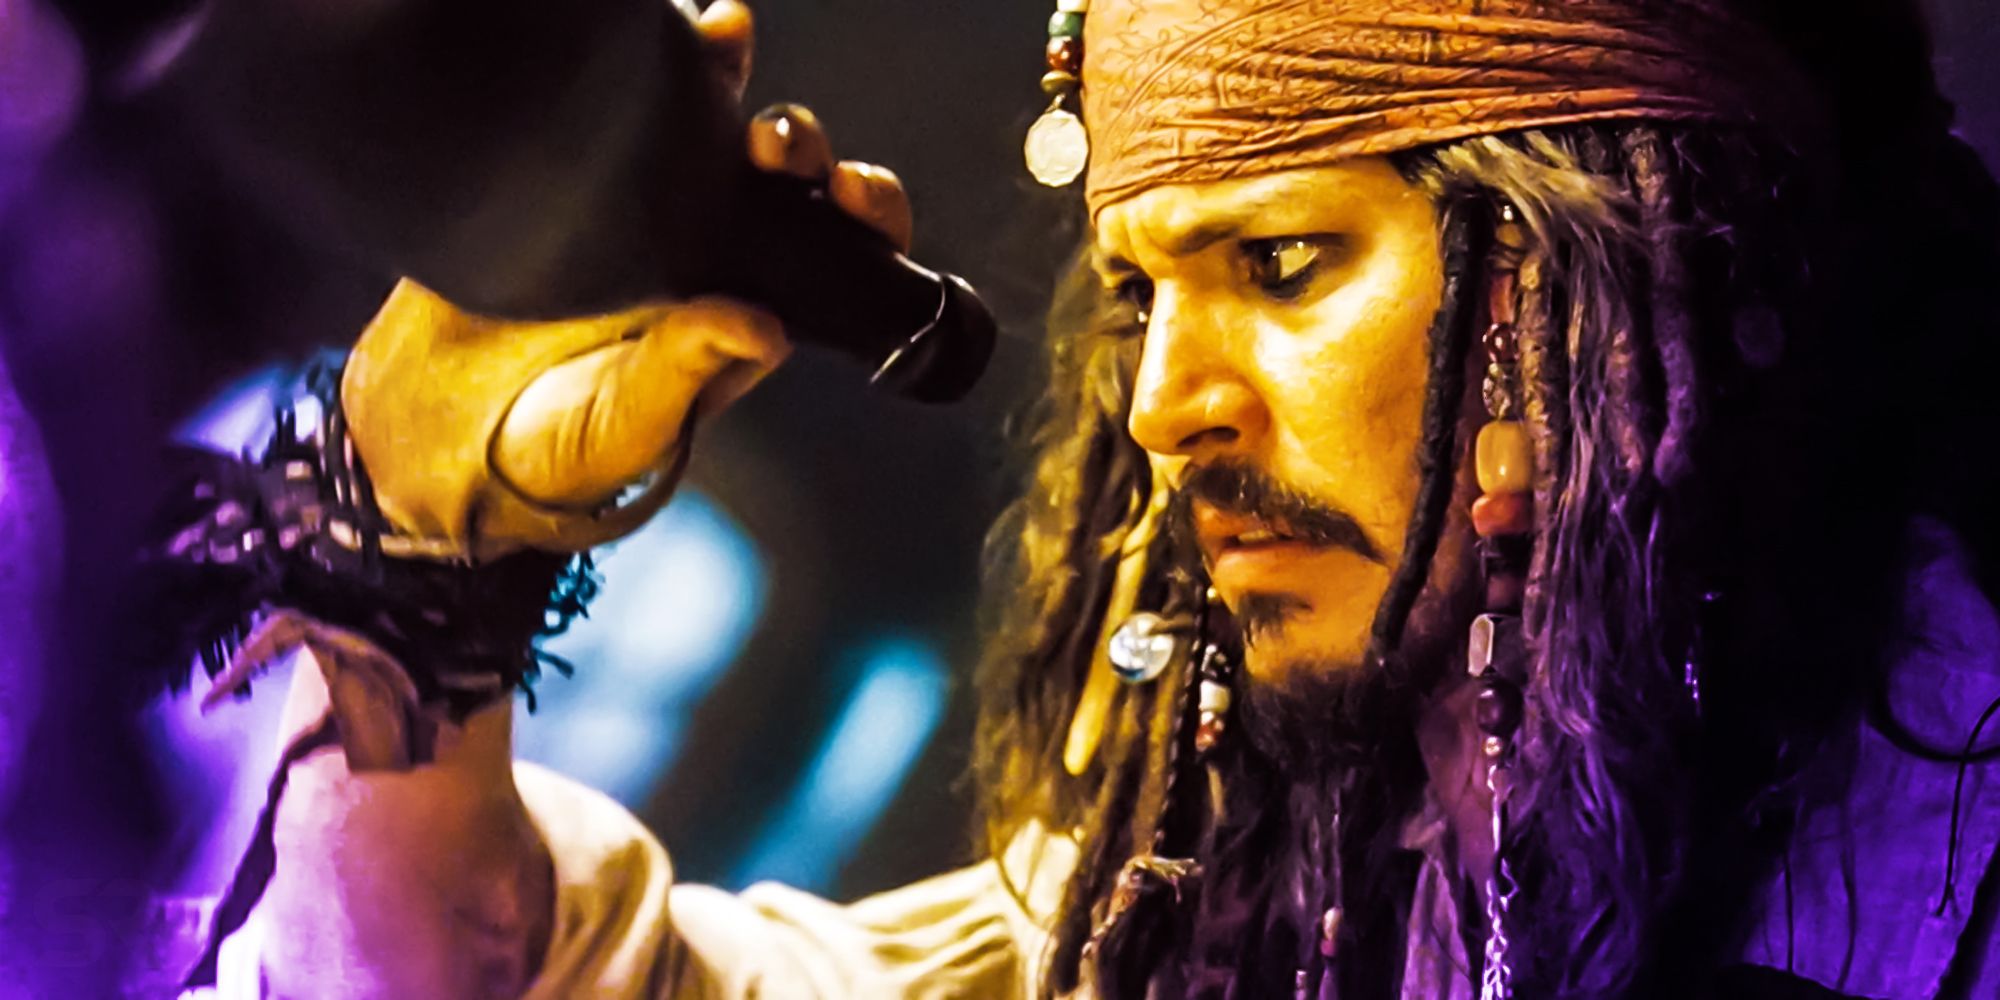 Pirates of the Caribbean jack sparrow's rum obsession secretly hides a wild true story